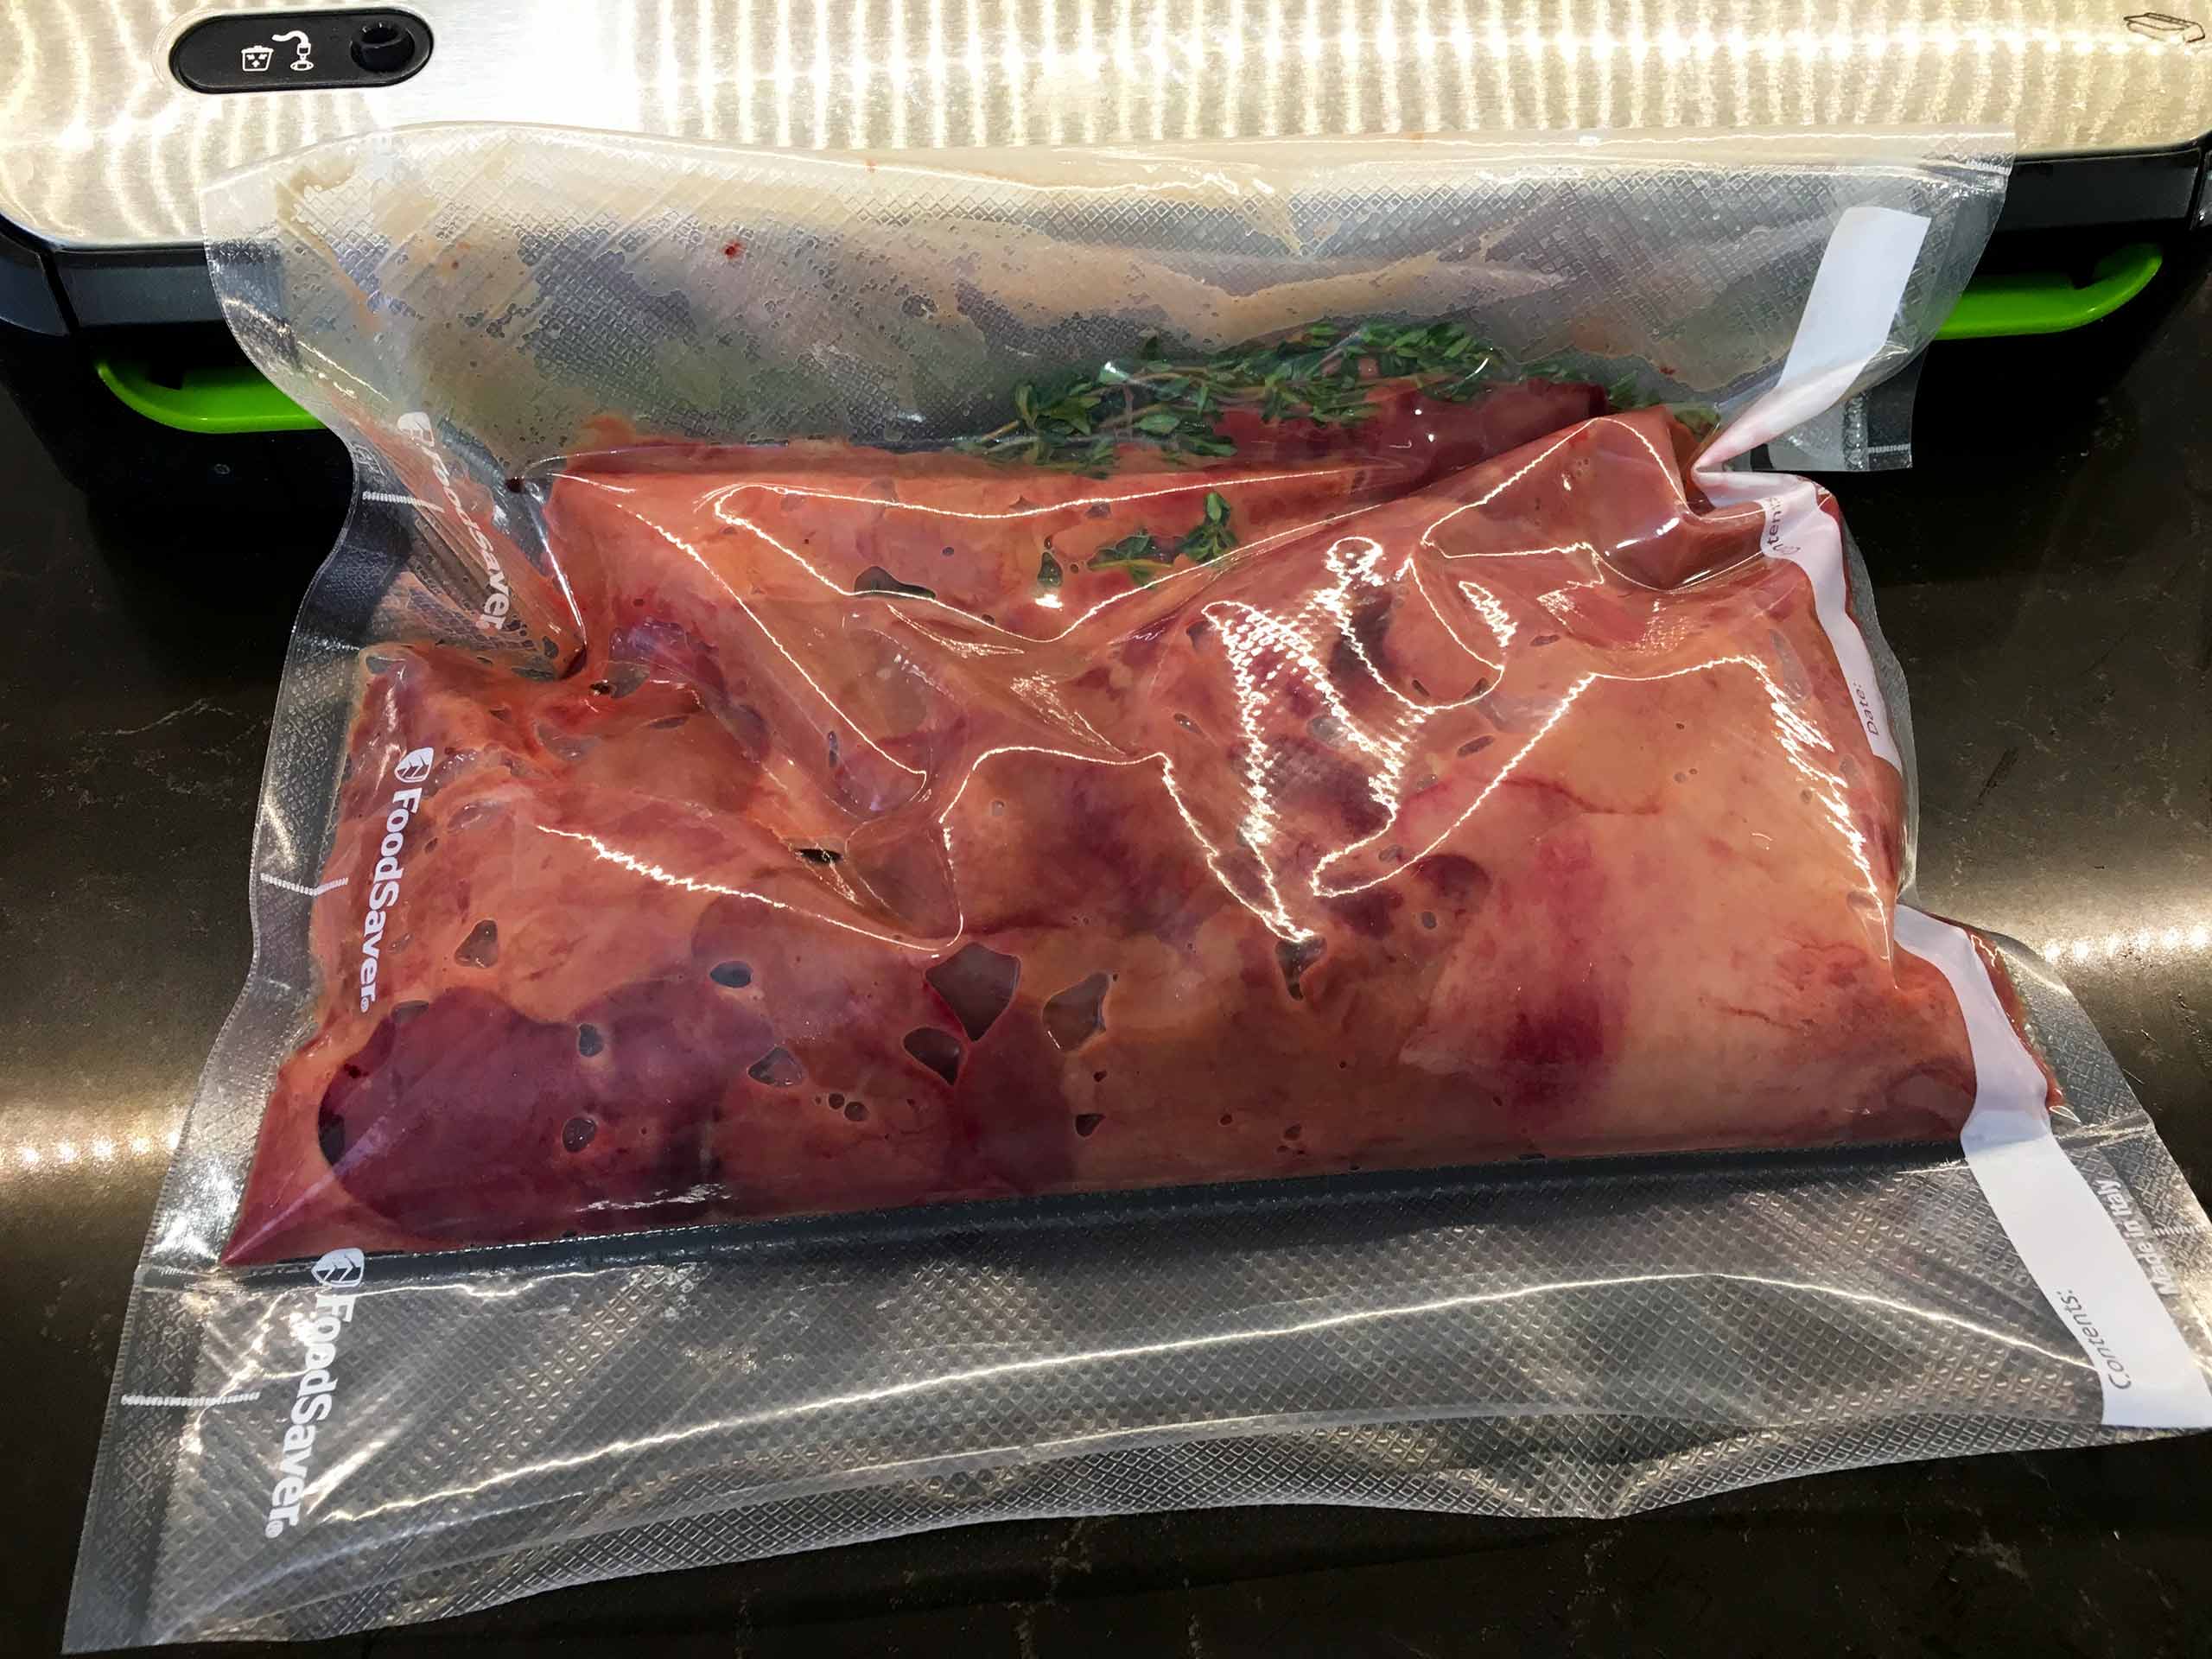 Place the liver in a vacuum bag and seal the bag